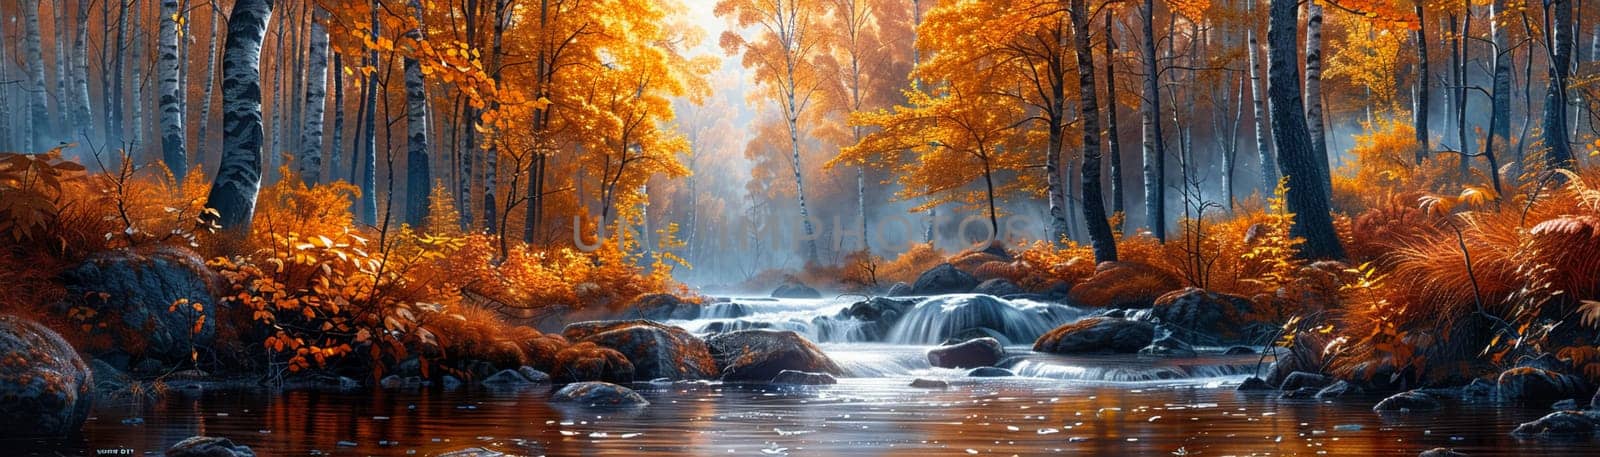 Winding river through a vibrant autumn forest, capturing natural beauty and seasonal change.